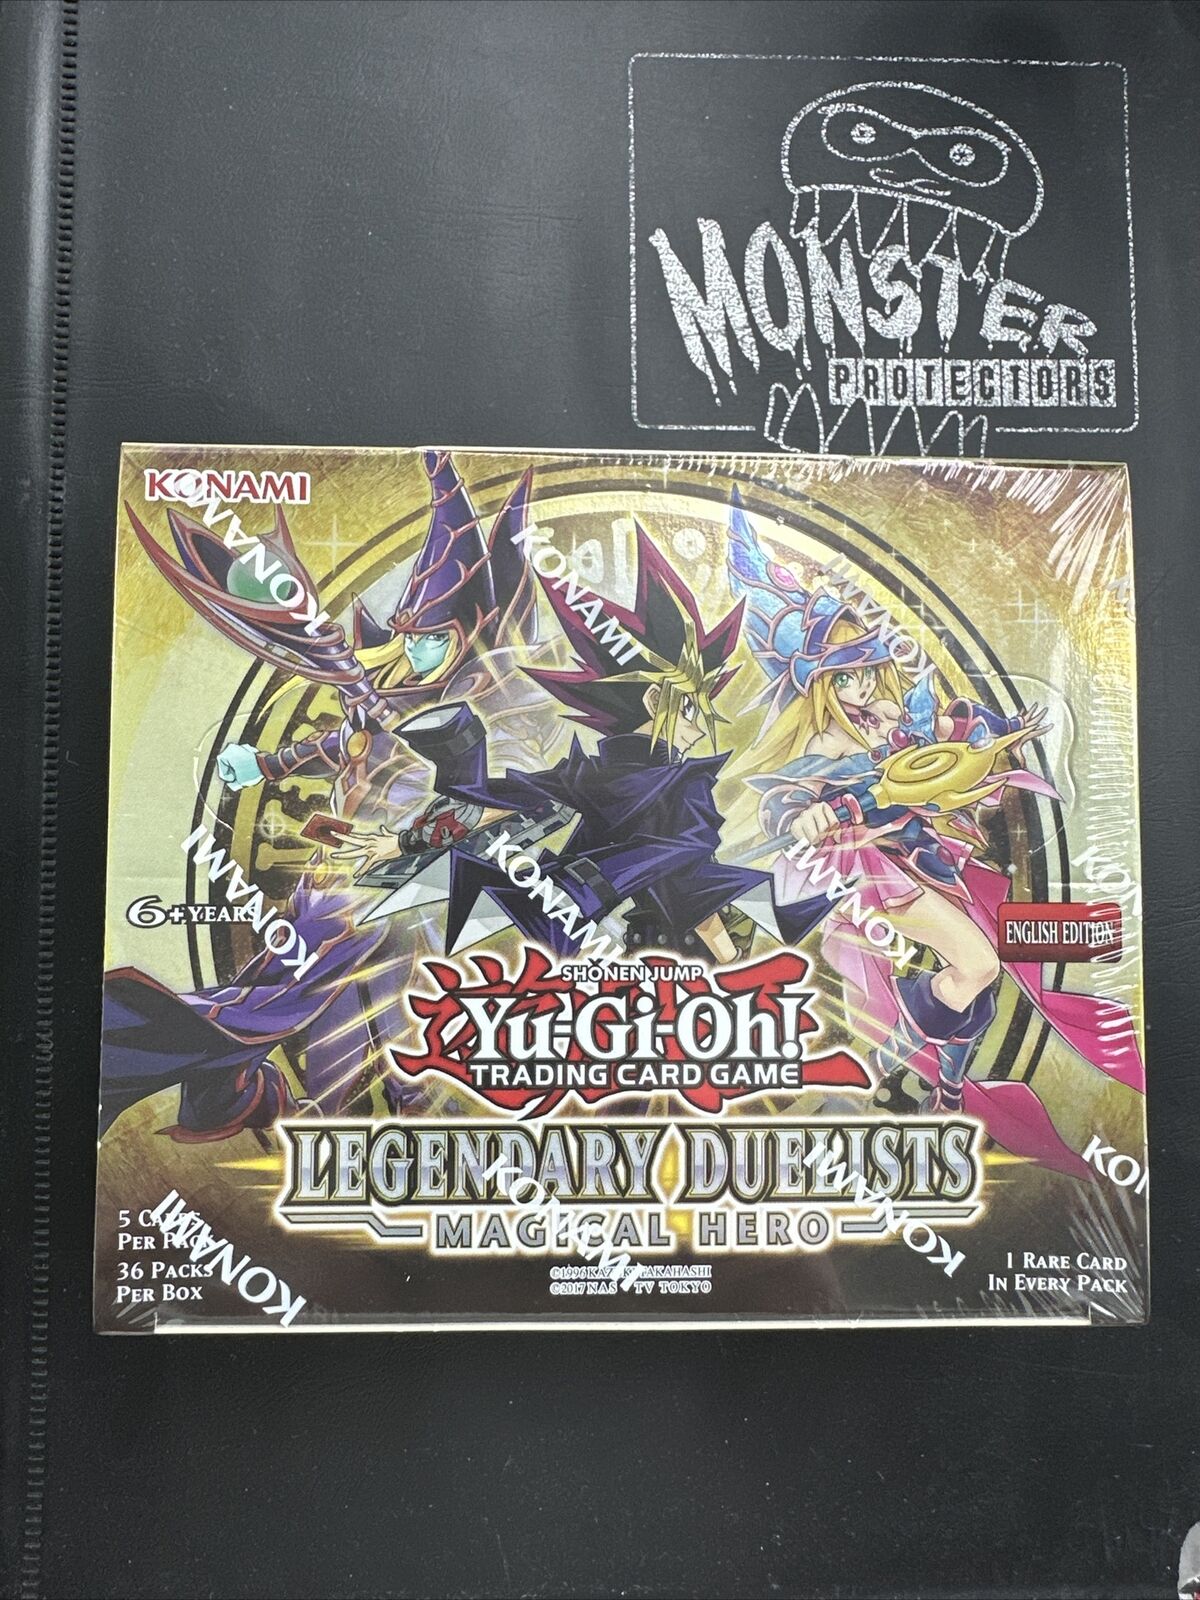 YUGIOH LEGENDARY DUELISTS MAGICAL HERO BOOSTER BOX - 36 PACKS UNLIMITED EDITION